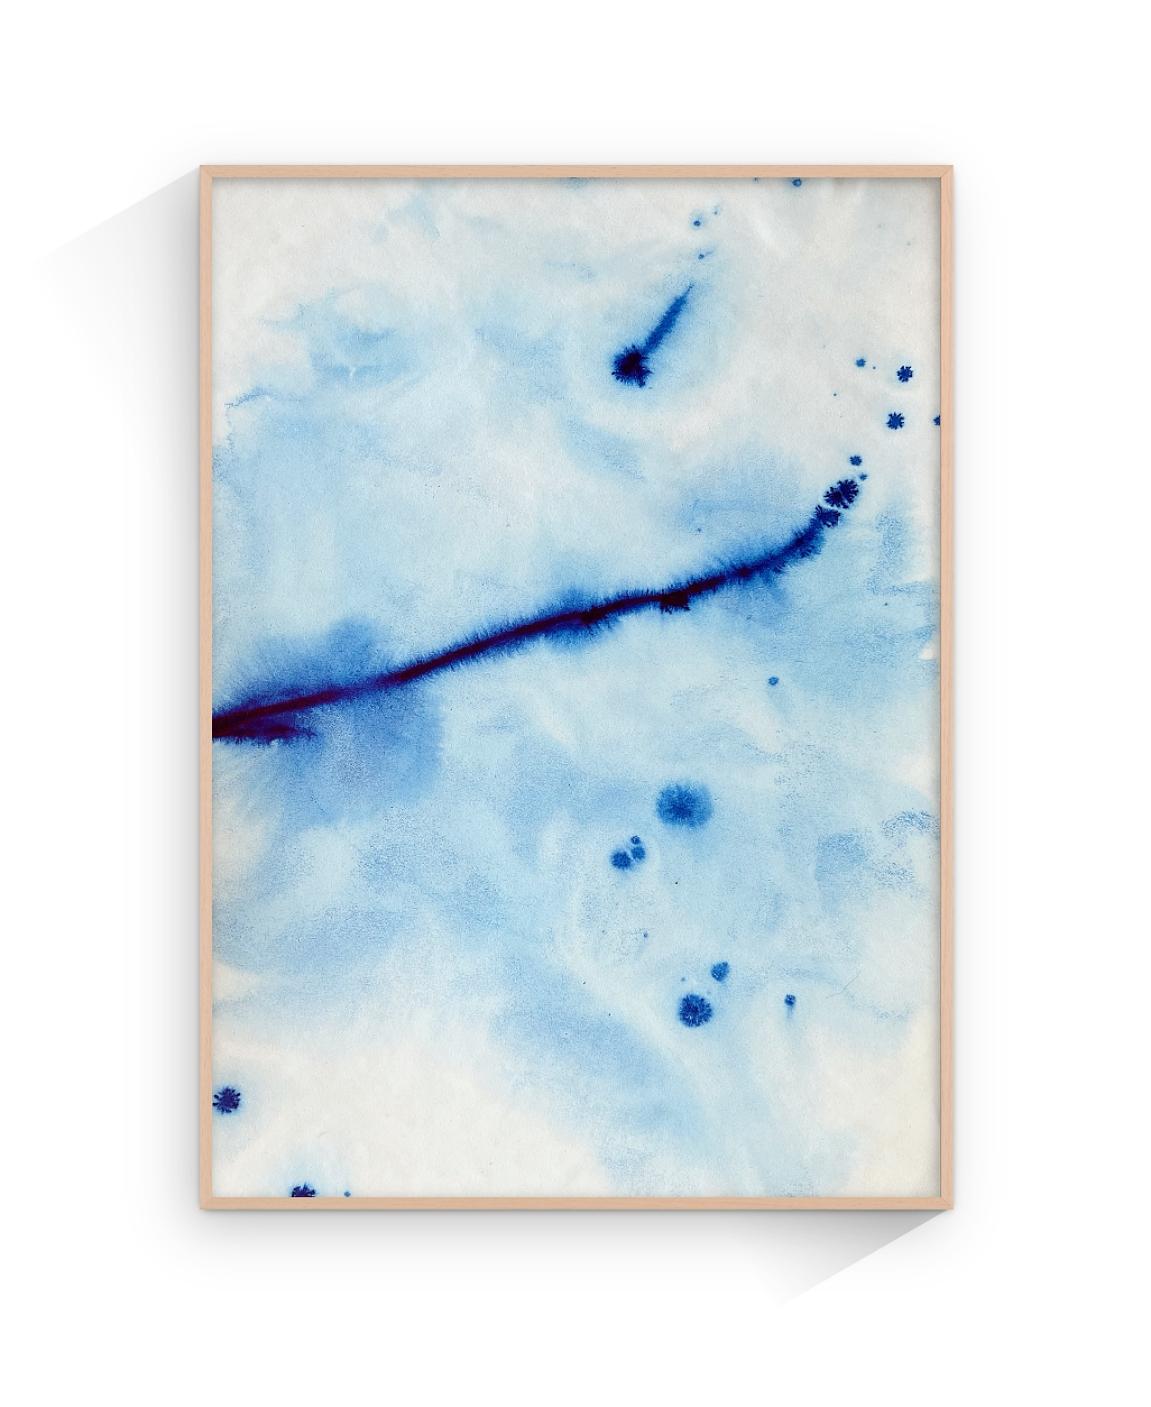 Monotype of Abstract Rounded Type, Modern Shapes and Layers, Blue Tones - Art by TUSET